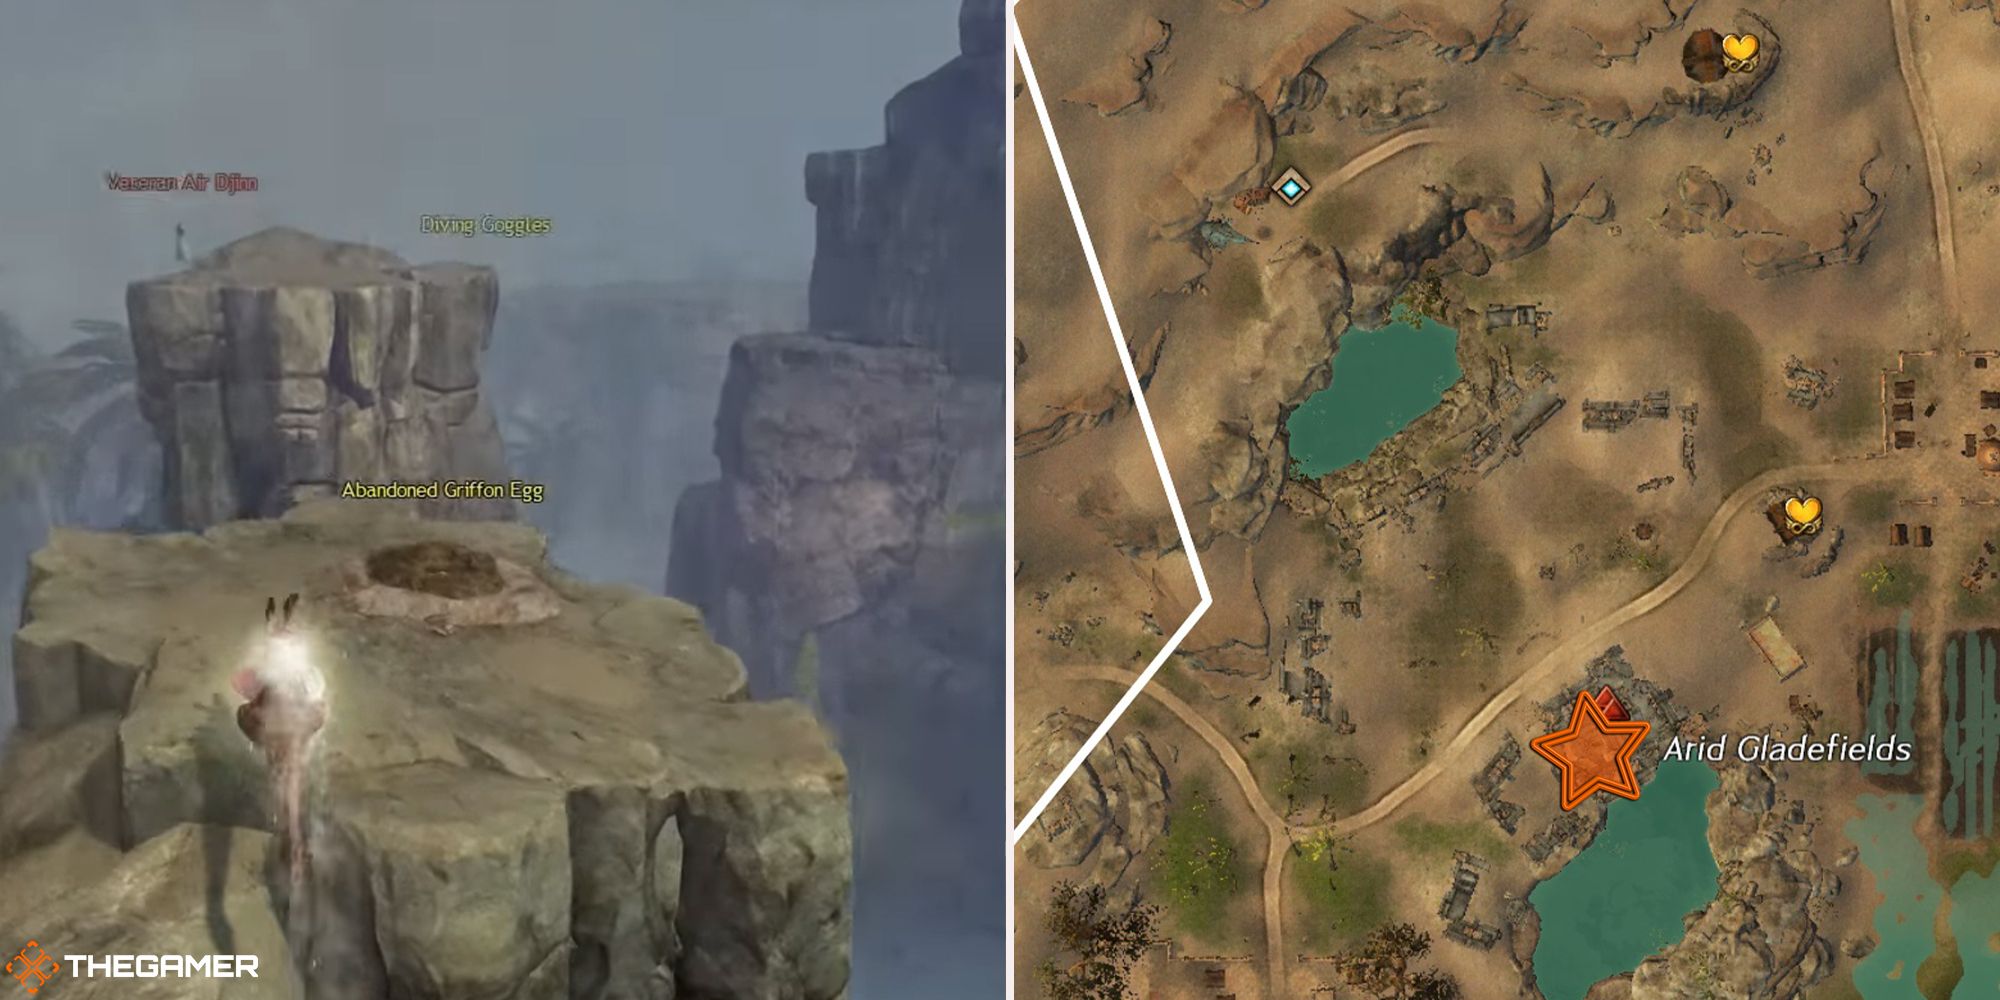 Guild Wars 2 - location of the Azure Riparian Griffon Egg